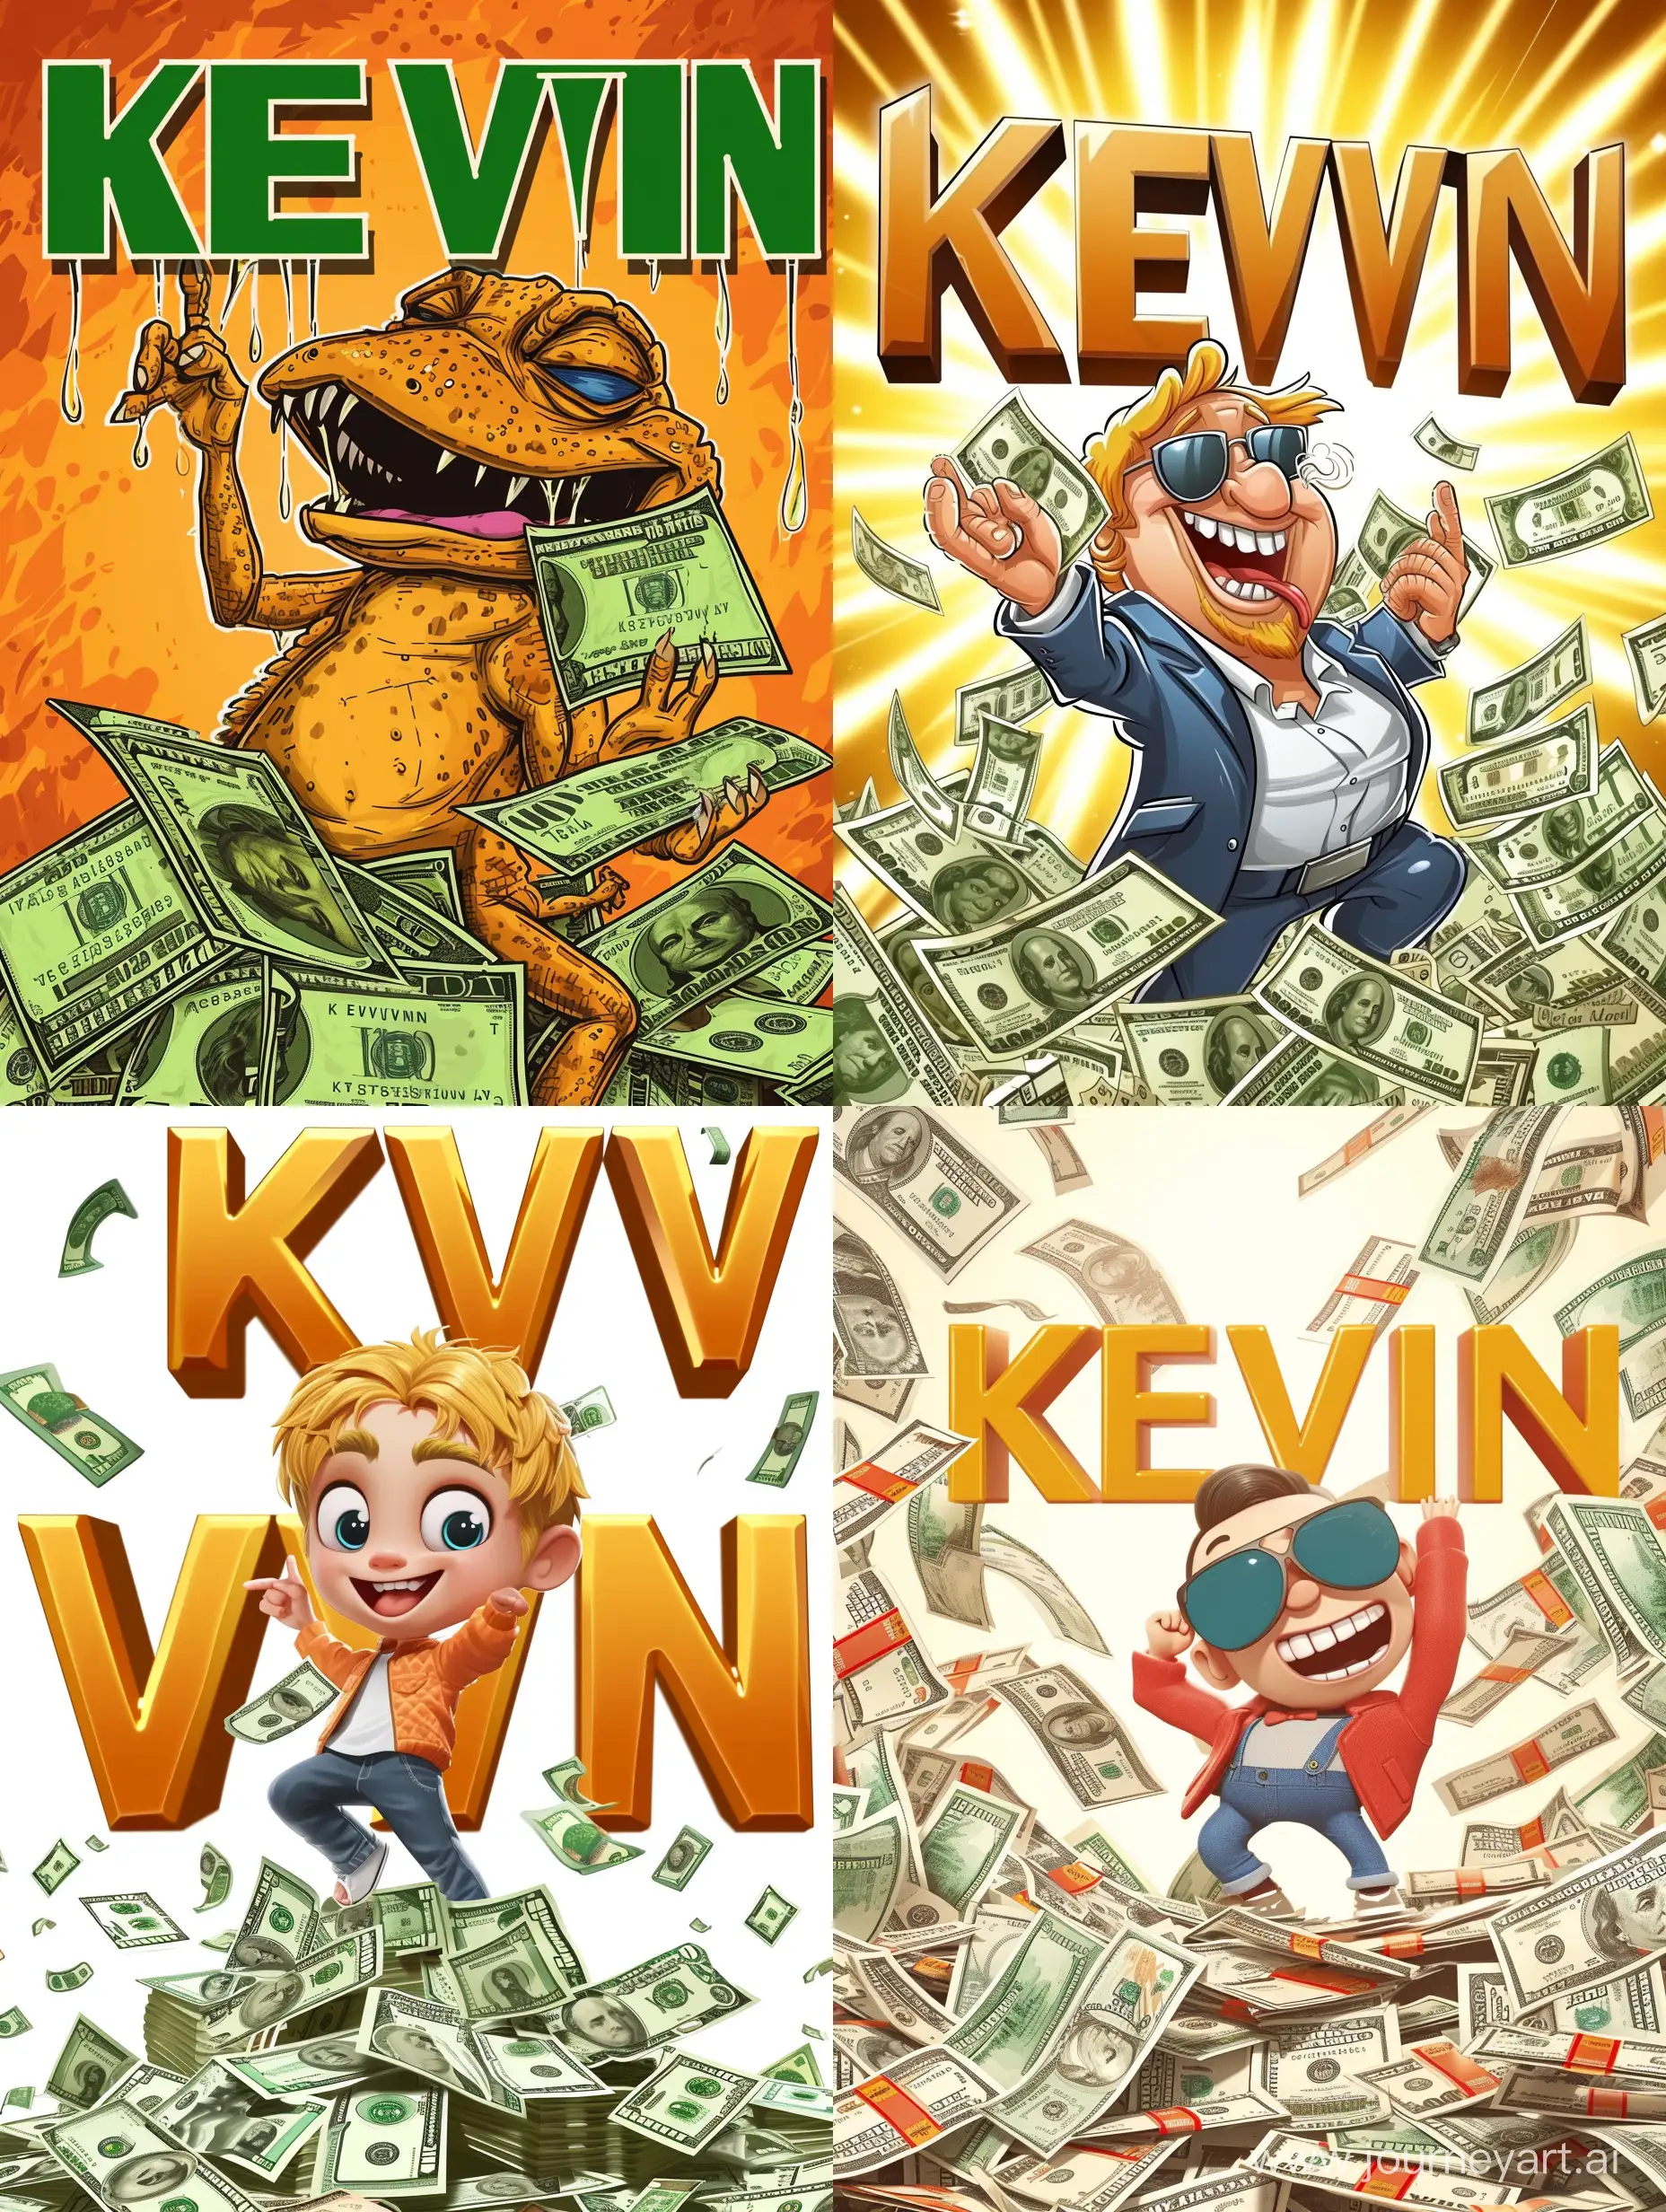 Wealthy-Kevin-Surrounded-by-Money-in-a-Bright-Setting